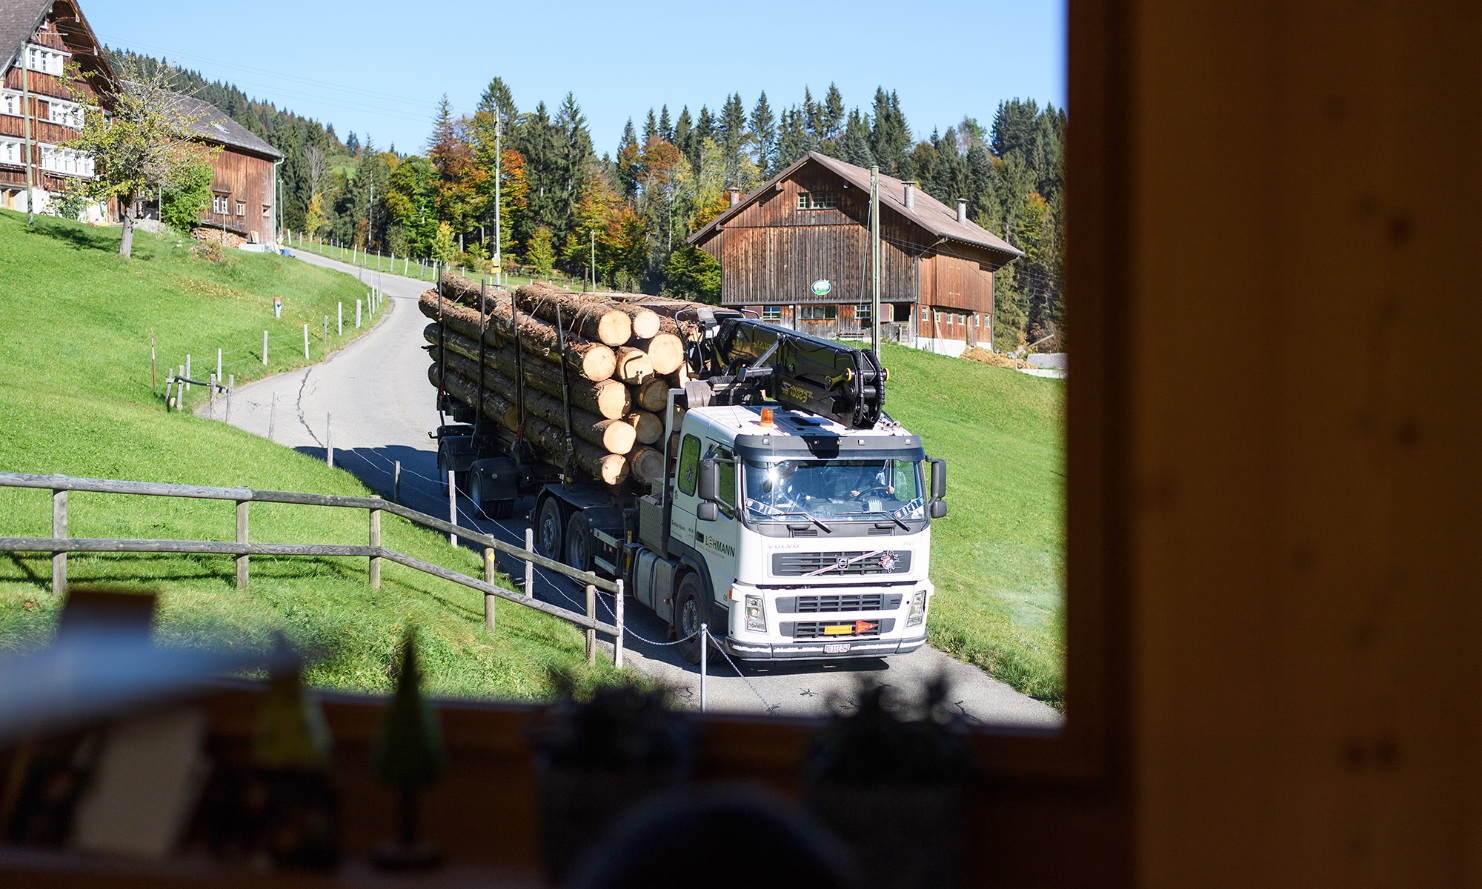 The log transporter, pictured through a window